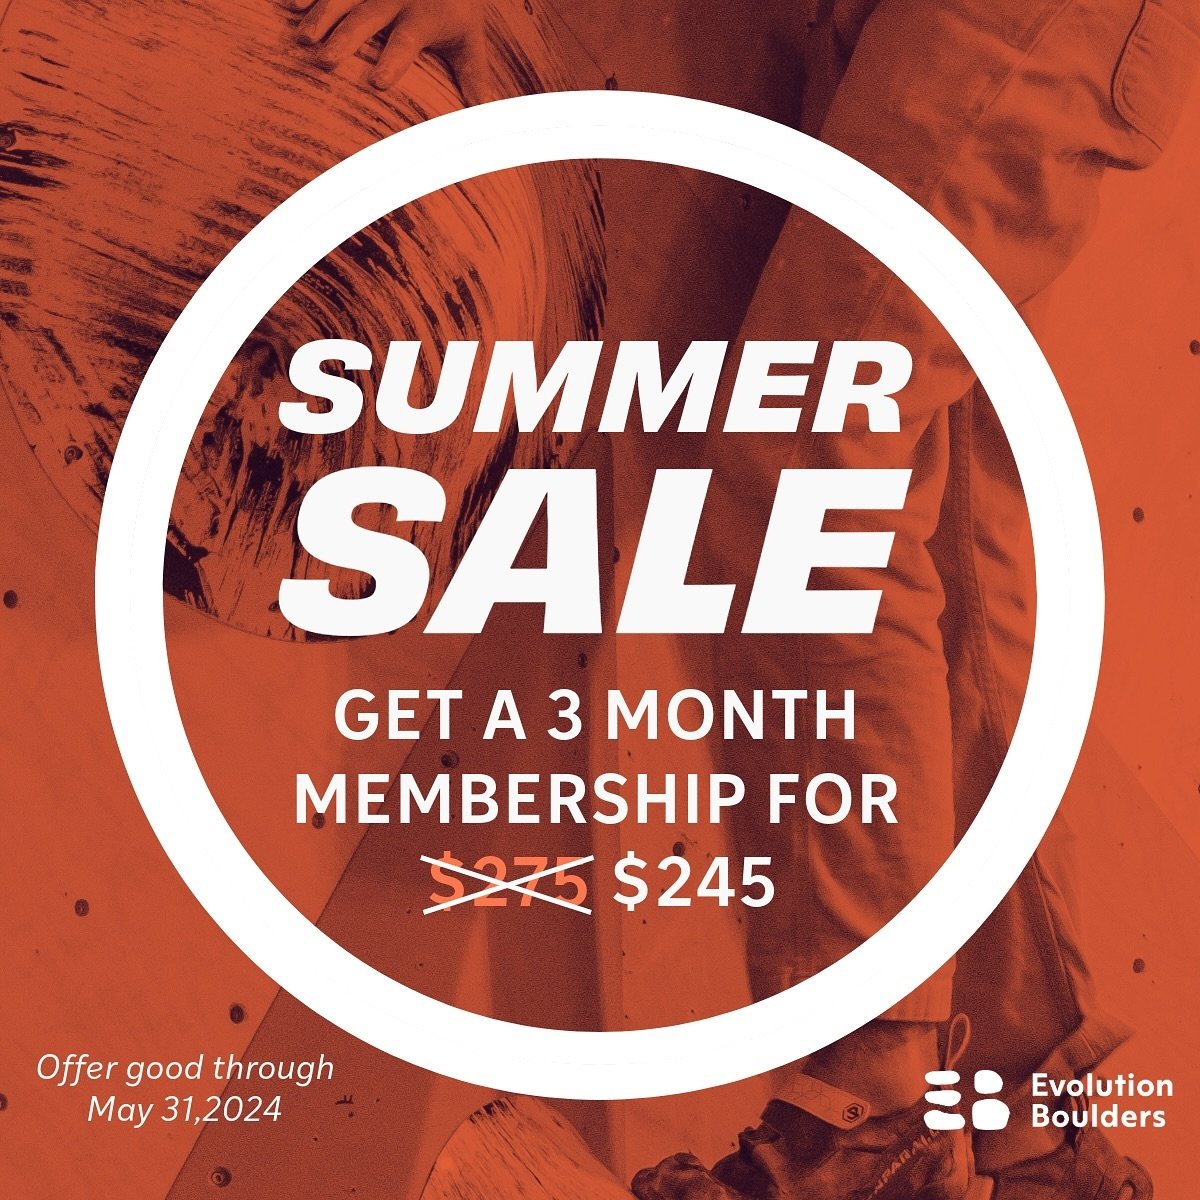 Home for the summer? 
Looking for ways to stay active when it&rsquo;s 97&deg;, humid, and the air is full of mosquitoes?
Enjoy the convenience of climbing fake rocks indoors to train for climbing real rocks outdoors?

GOOD THING OUR SUMMER SALE IS HE